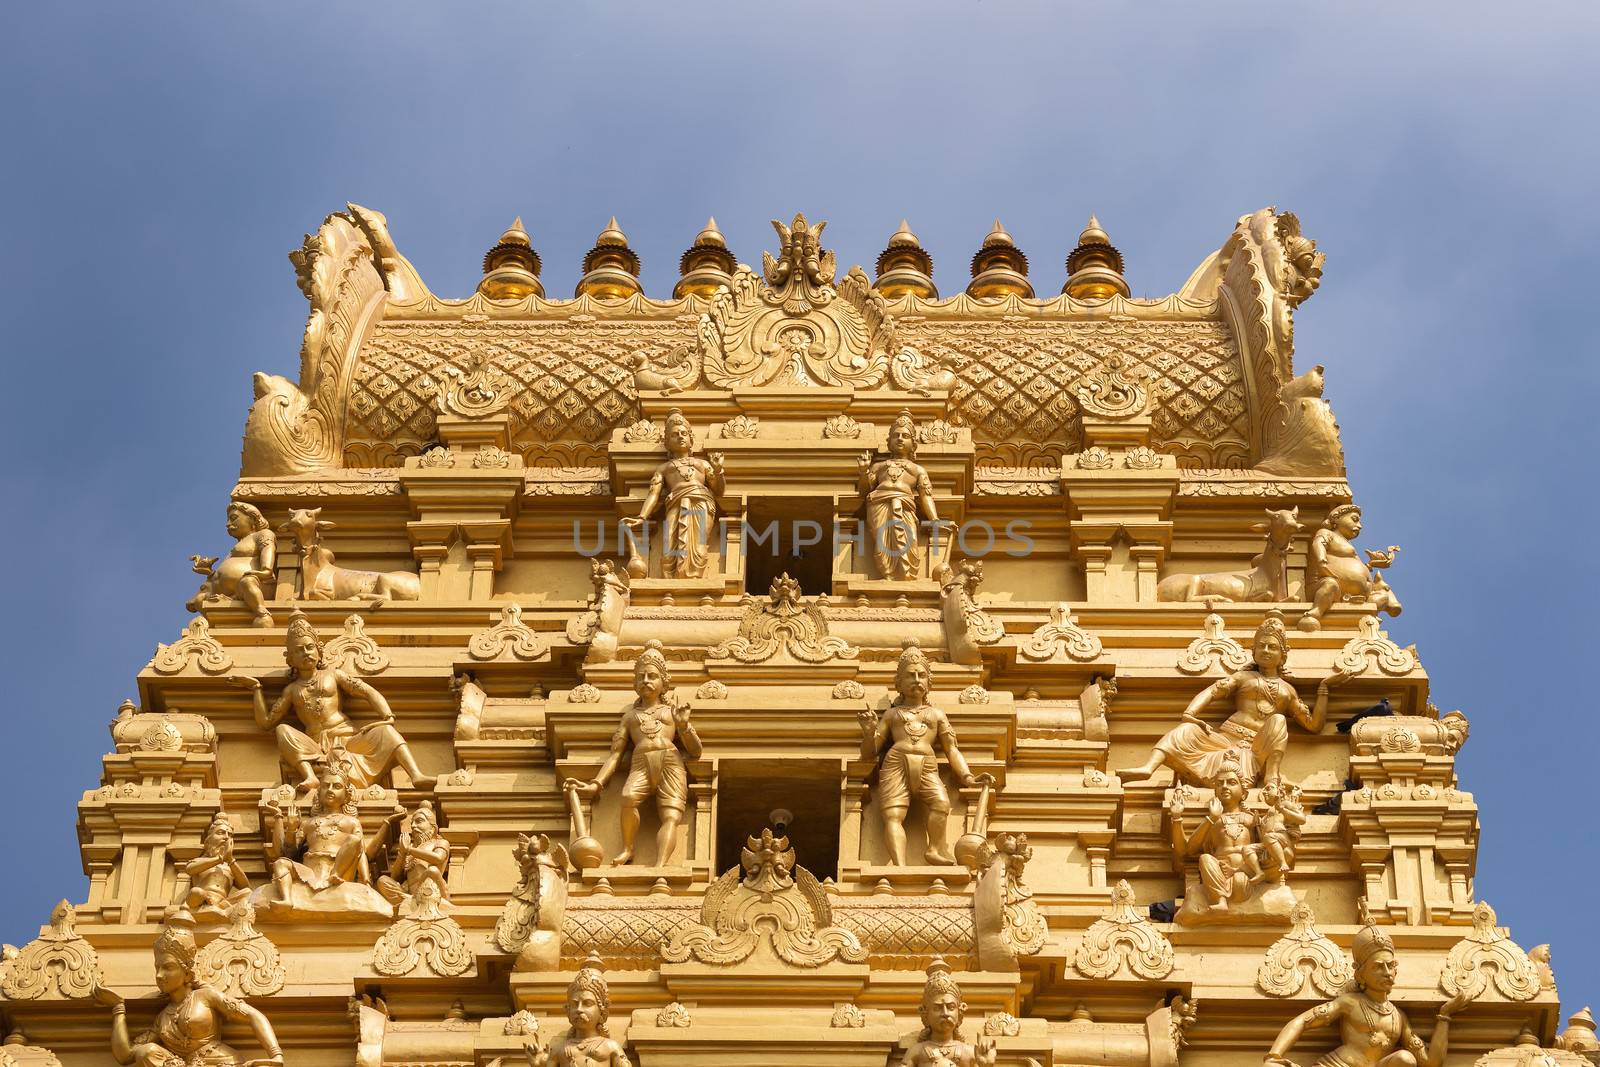 Plenty of golden statues on the top of the entrance tower at Sri Naheshwara in Bengaluru.